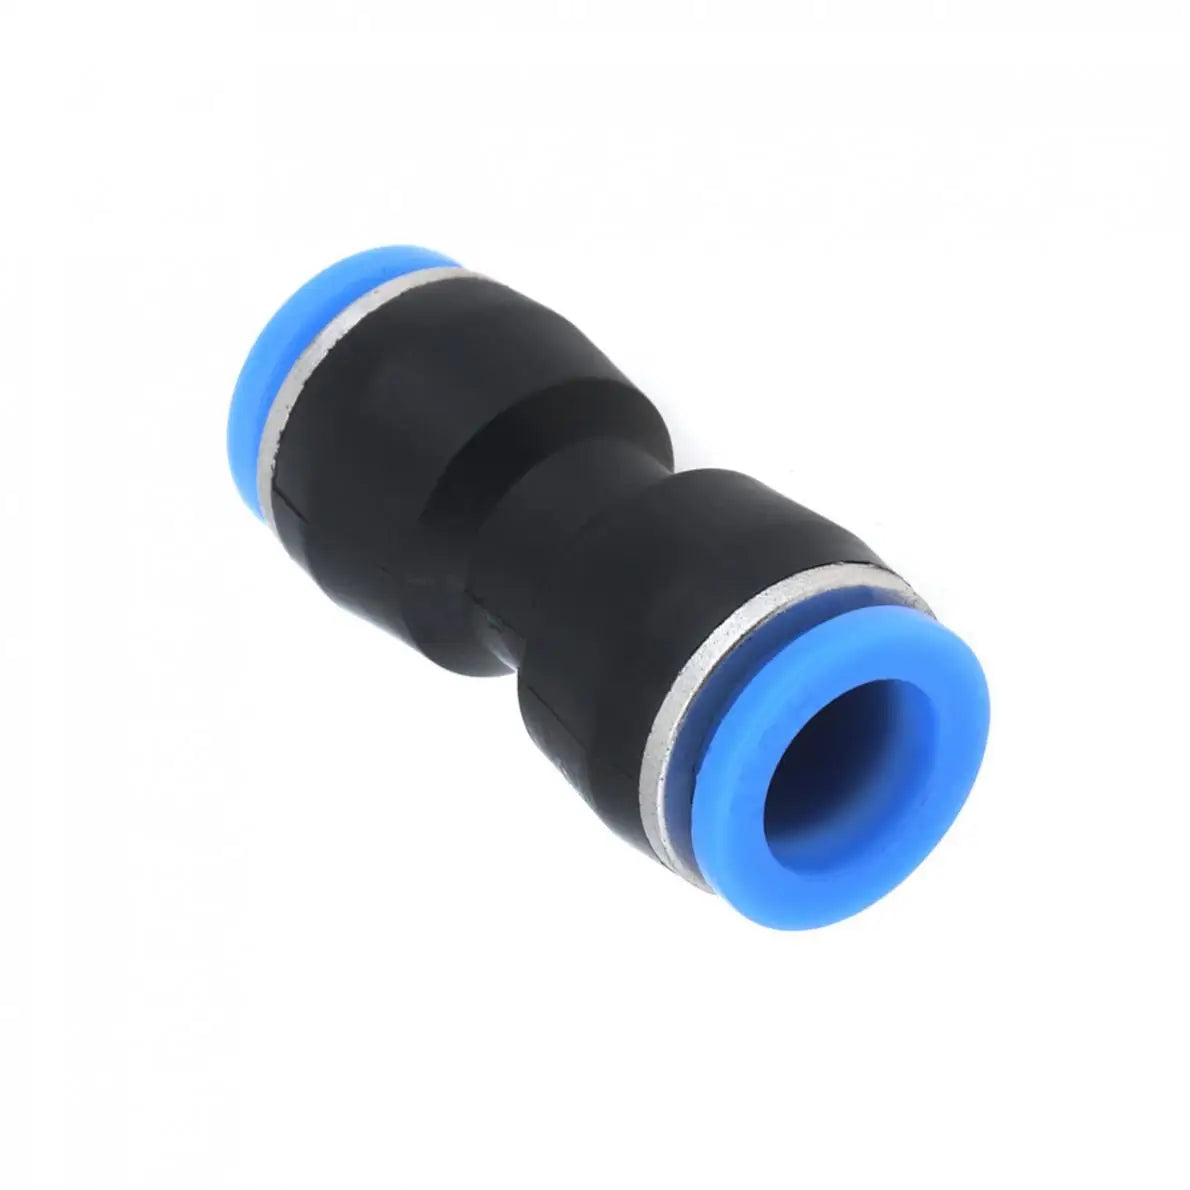 10PCS/lot 12MM PU-12 Plastic Straight Through Quick Connector Pneumatic Insertion Air Tube fit